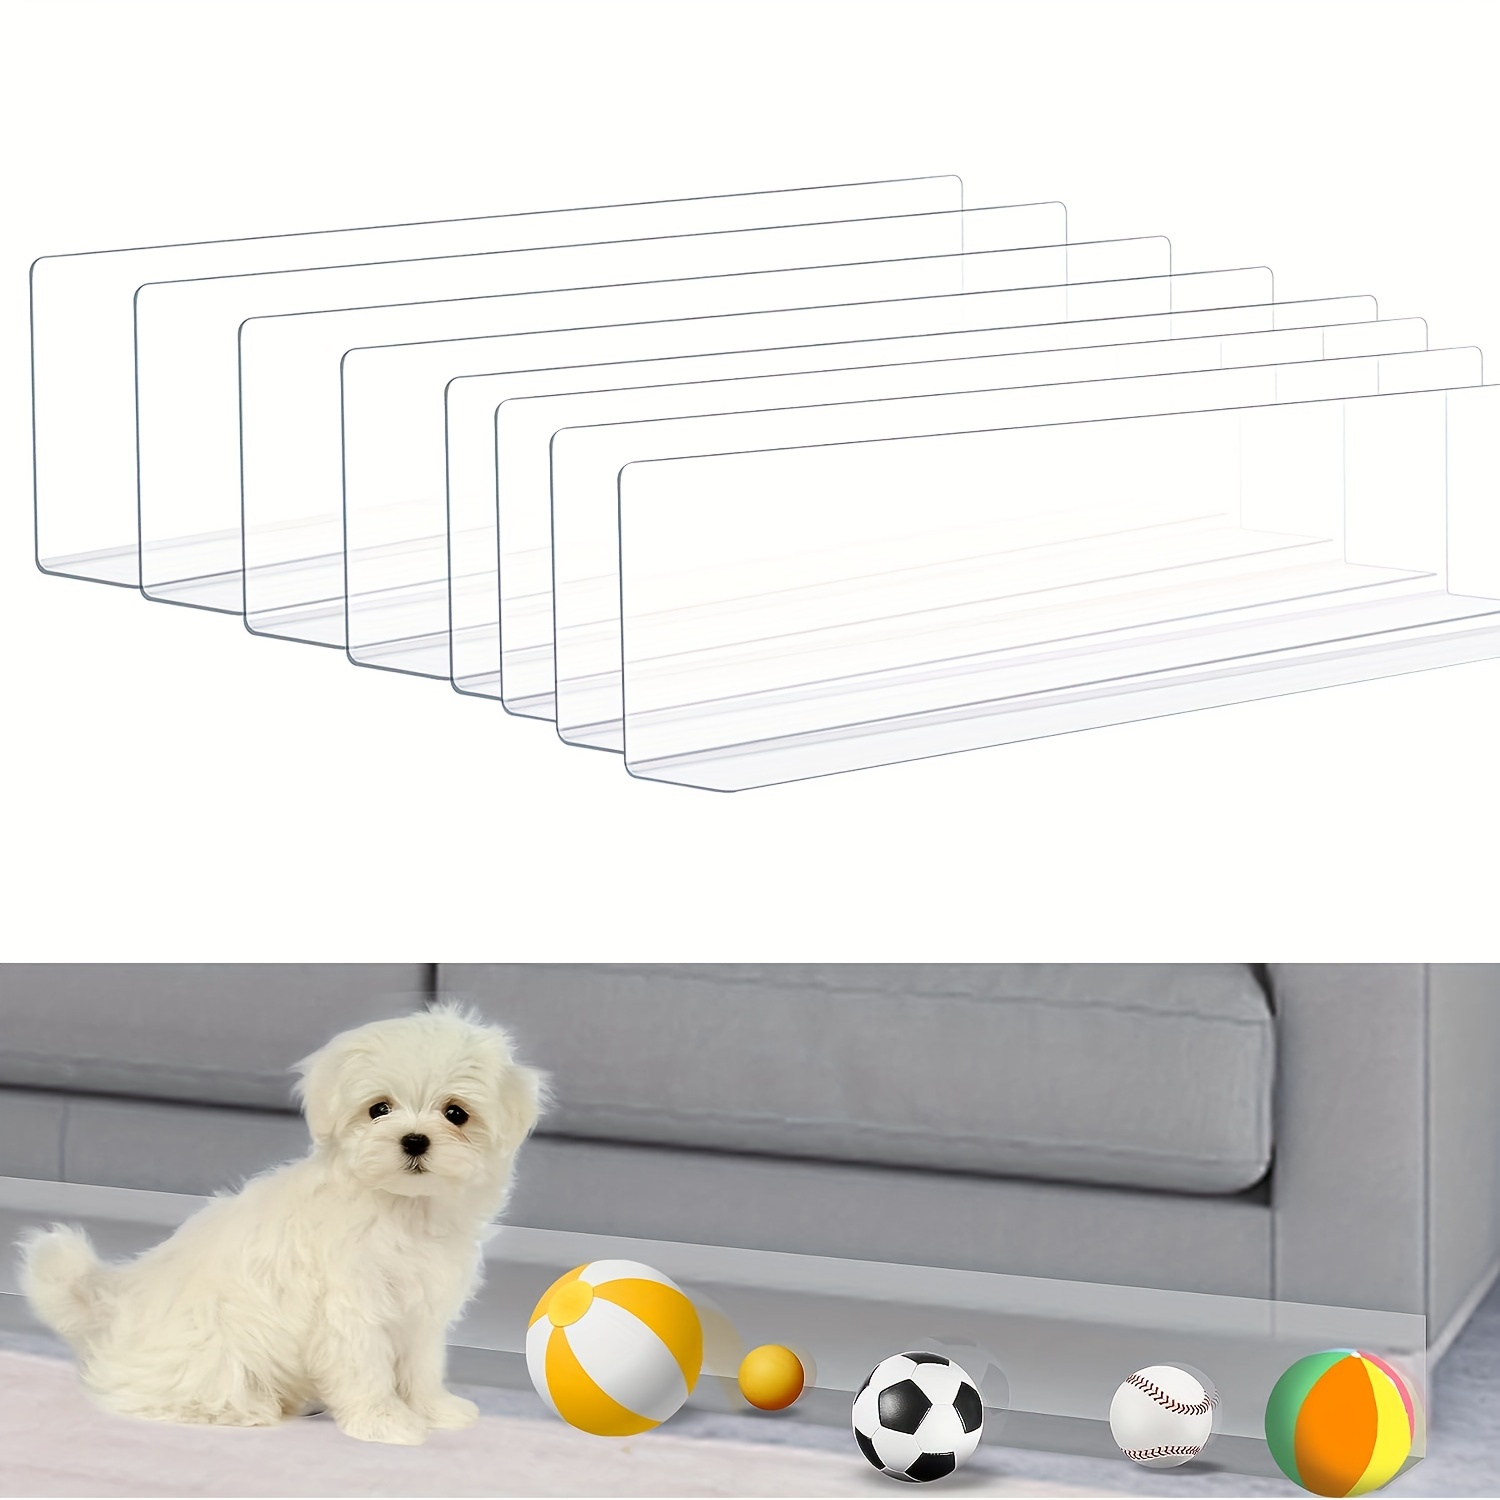  Toy Blocker for Under Couch, Under Bed Blocker for